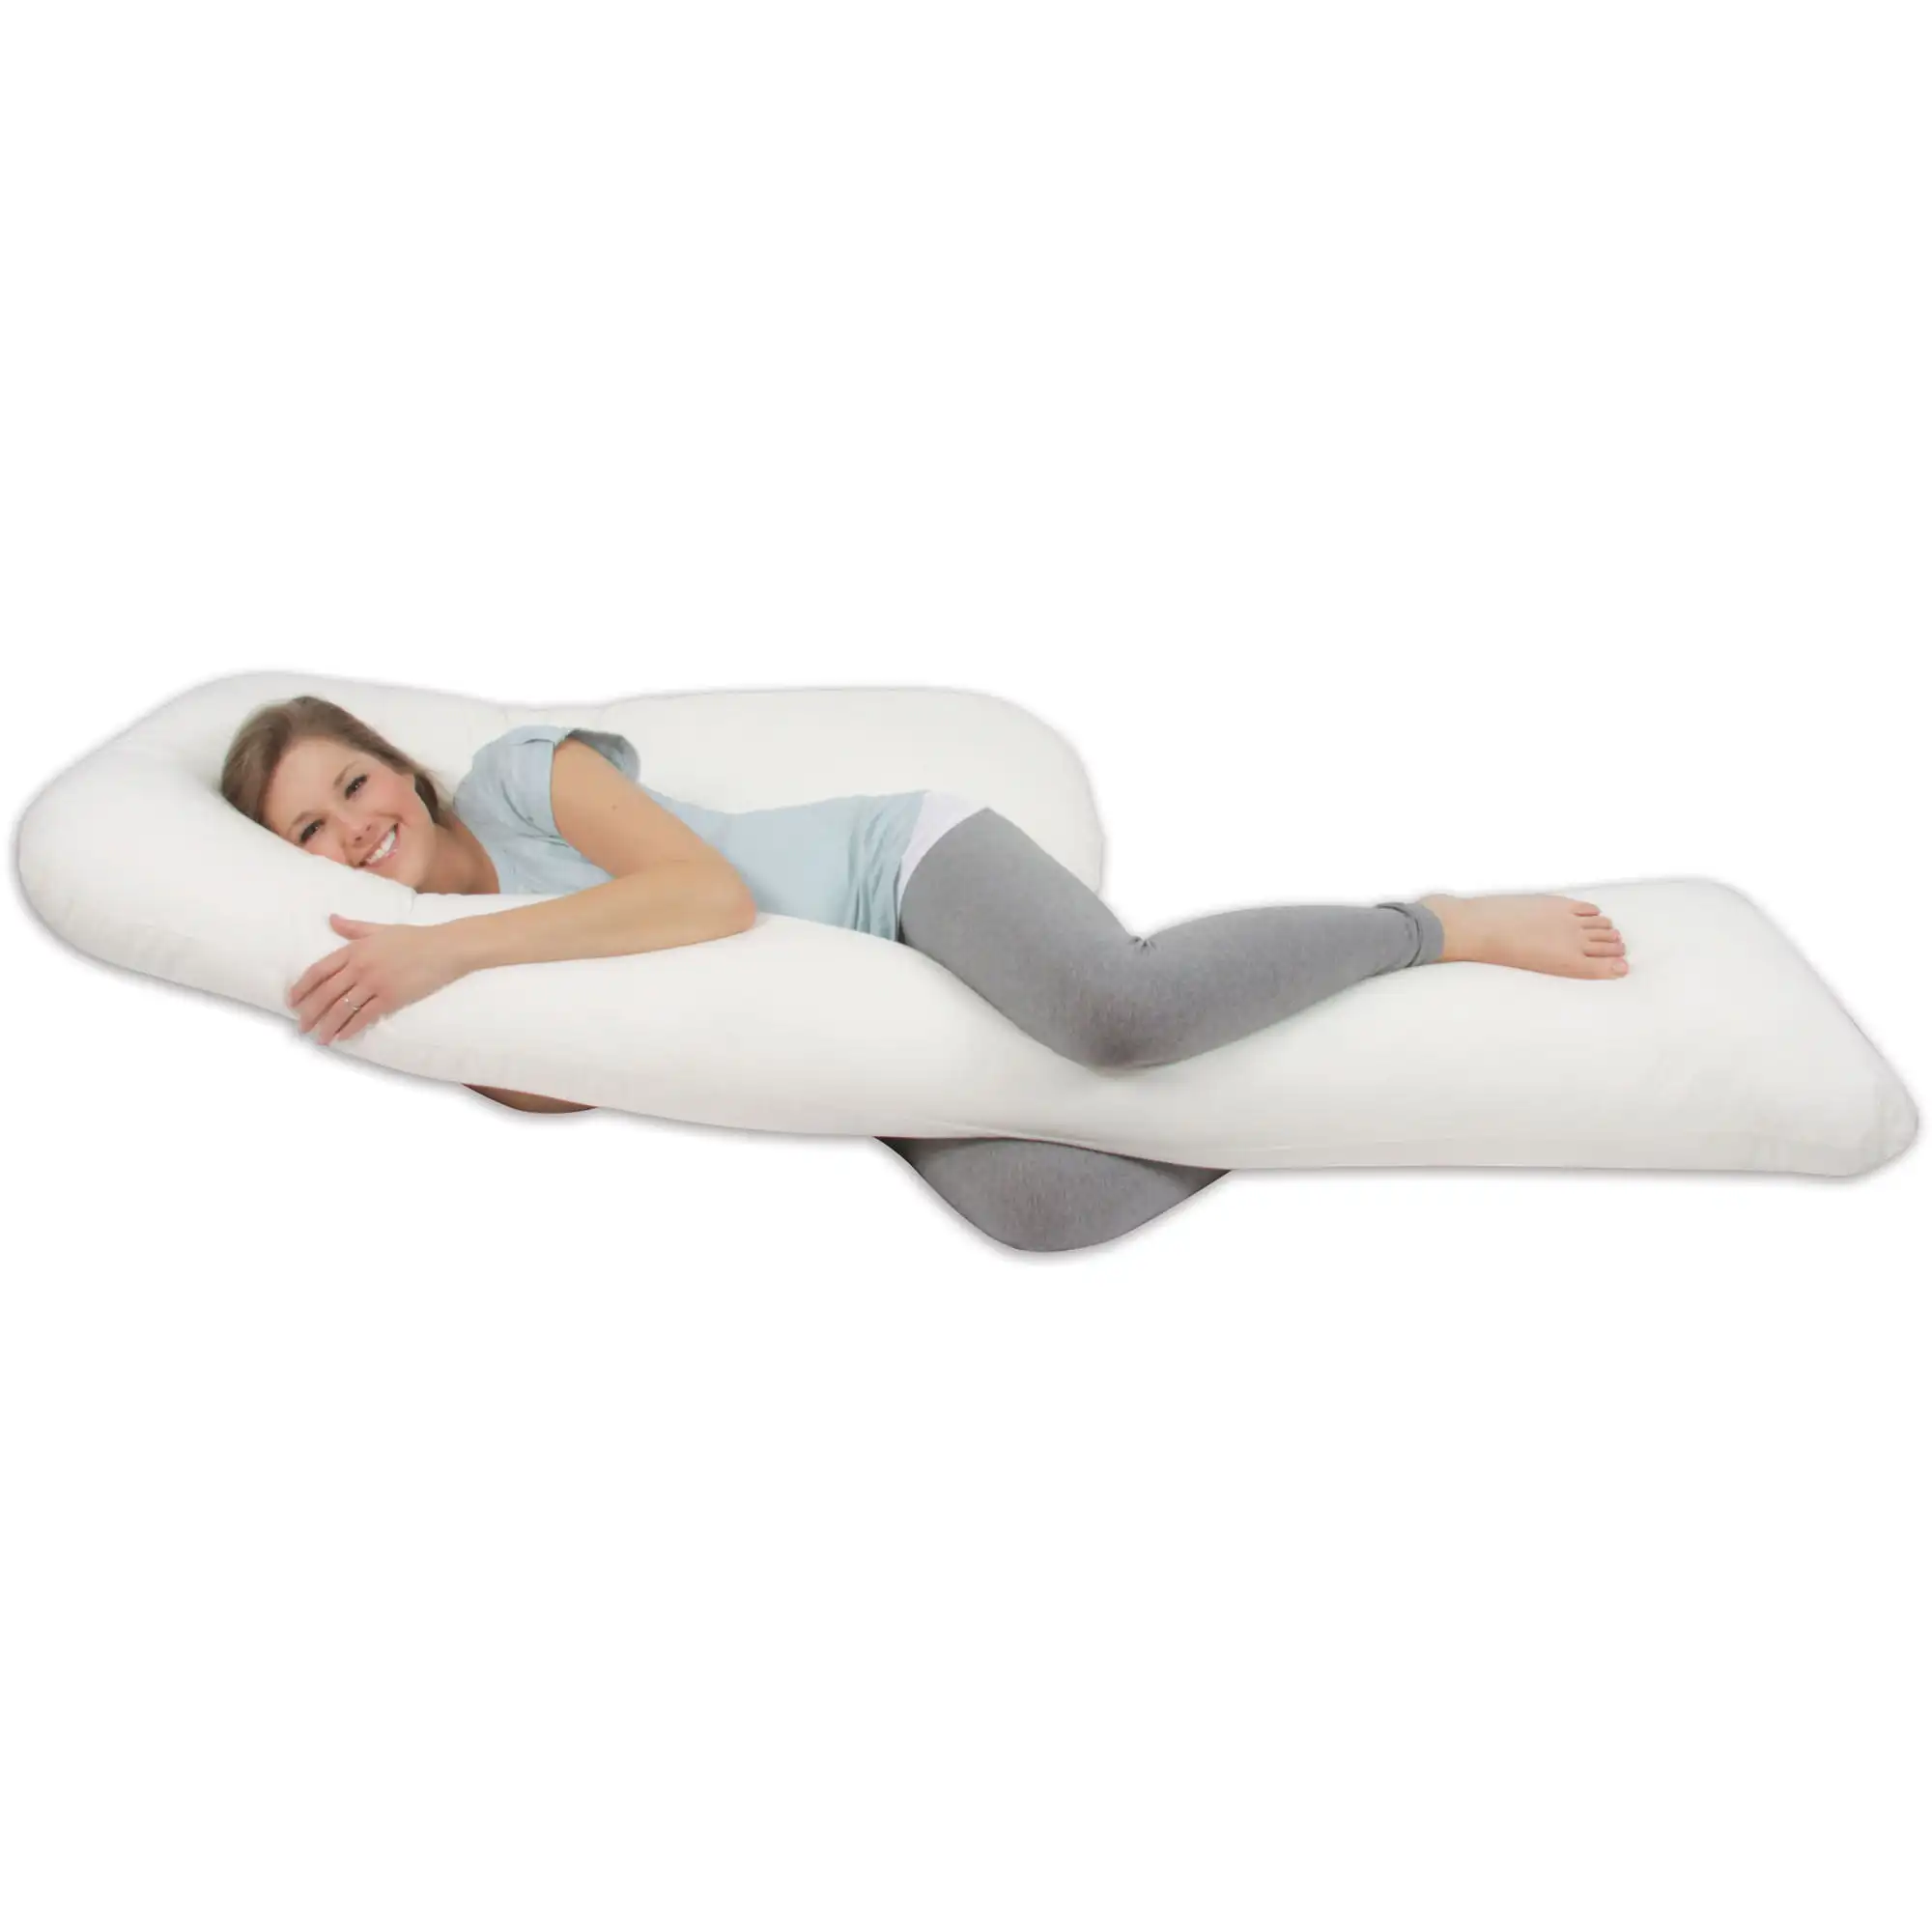 

Leachco All Nighter Total Body Pregnancy Pillow, Ivory,Extra-wide and Long Head Section for Versatile Sleeping Styles